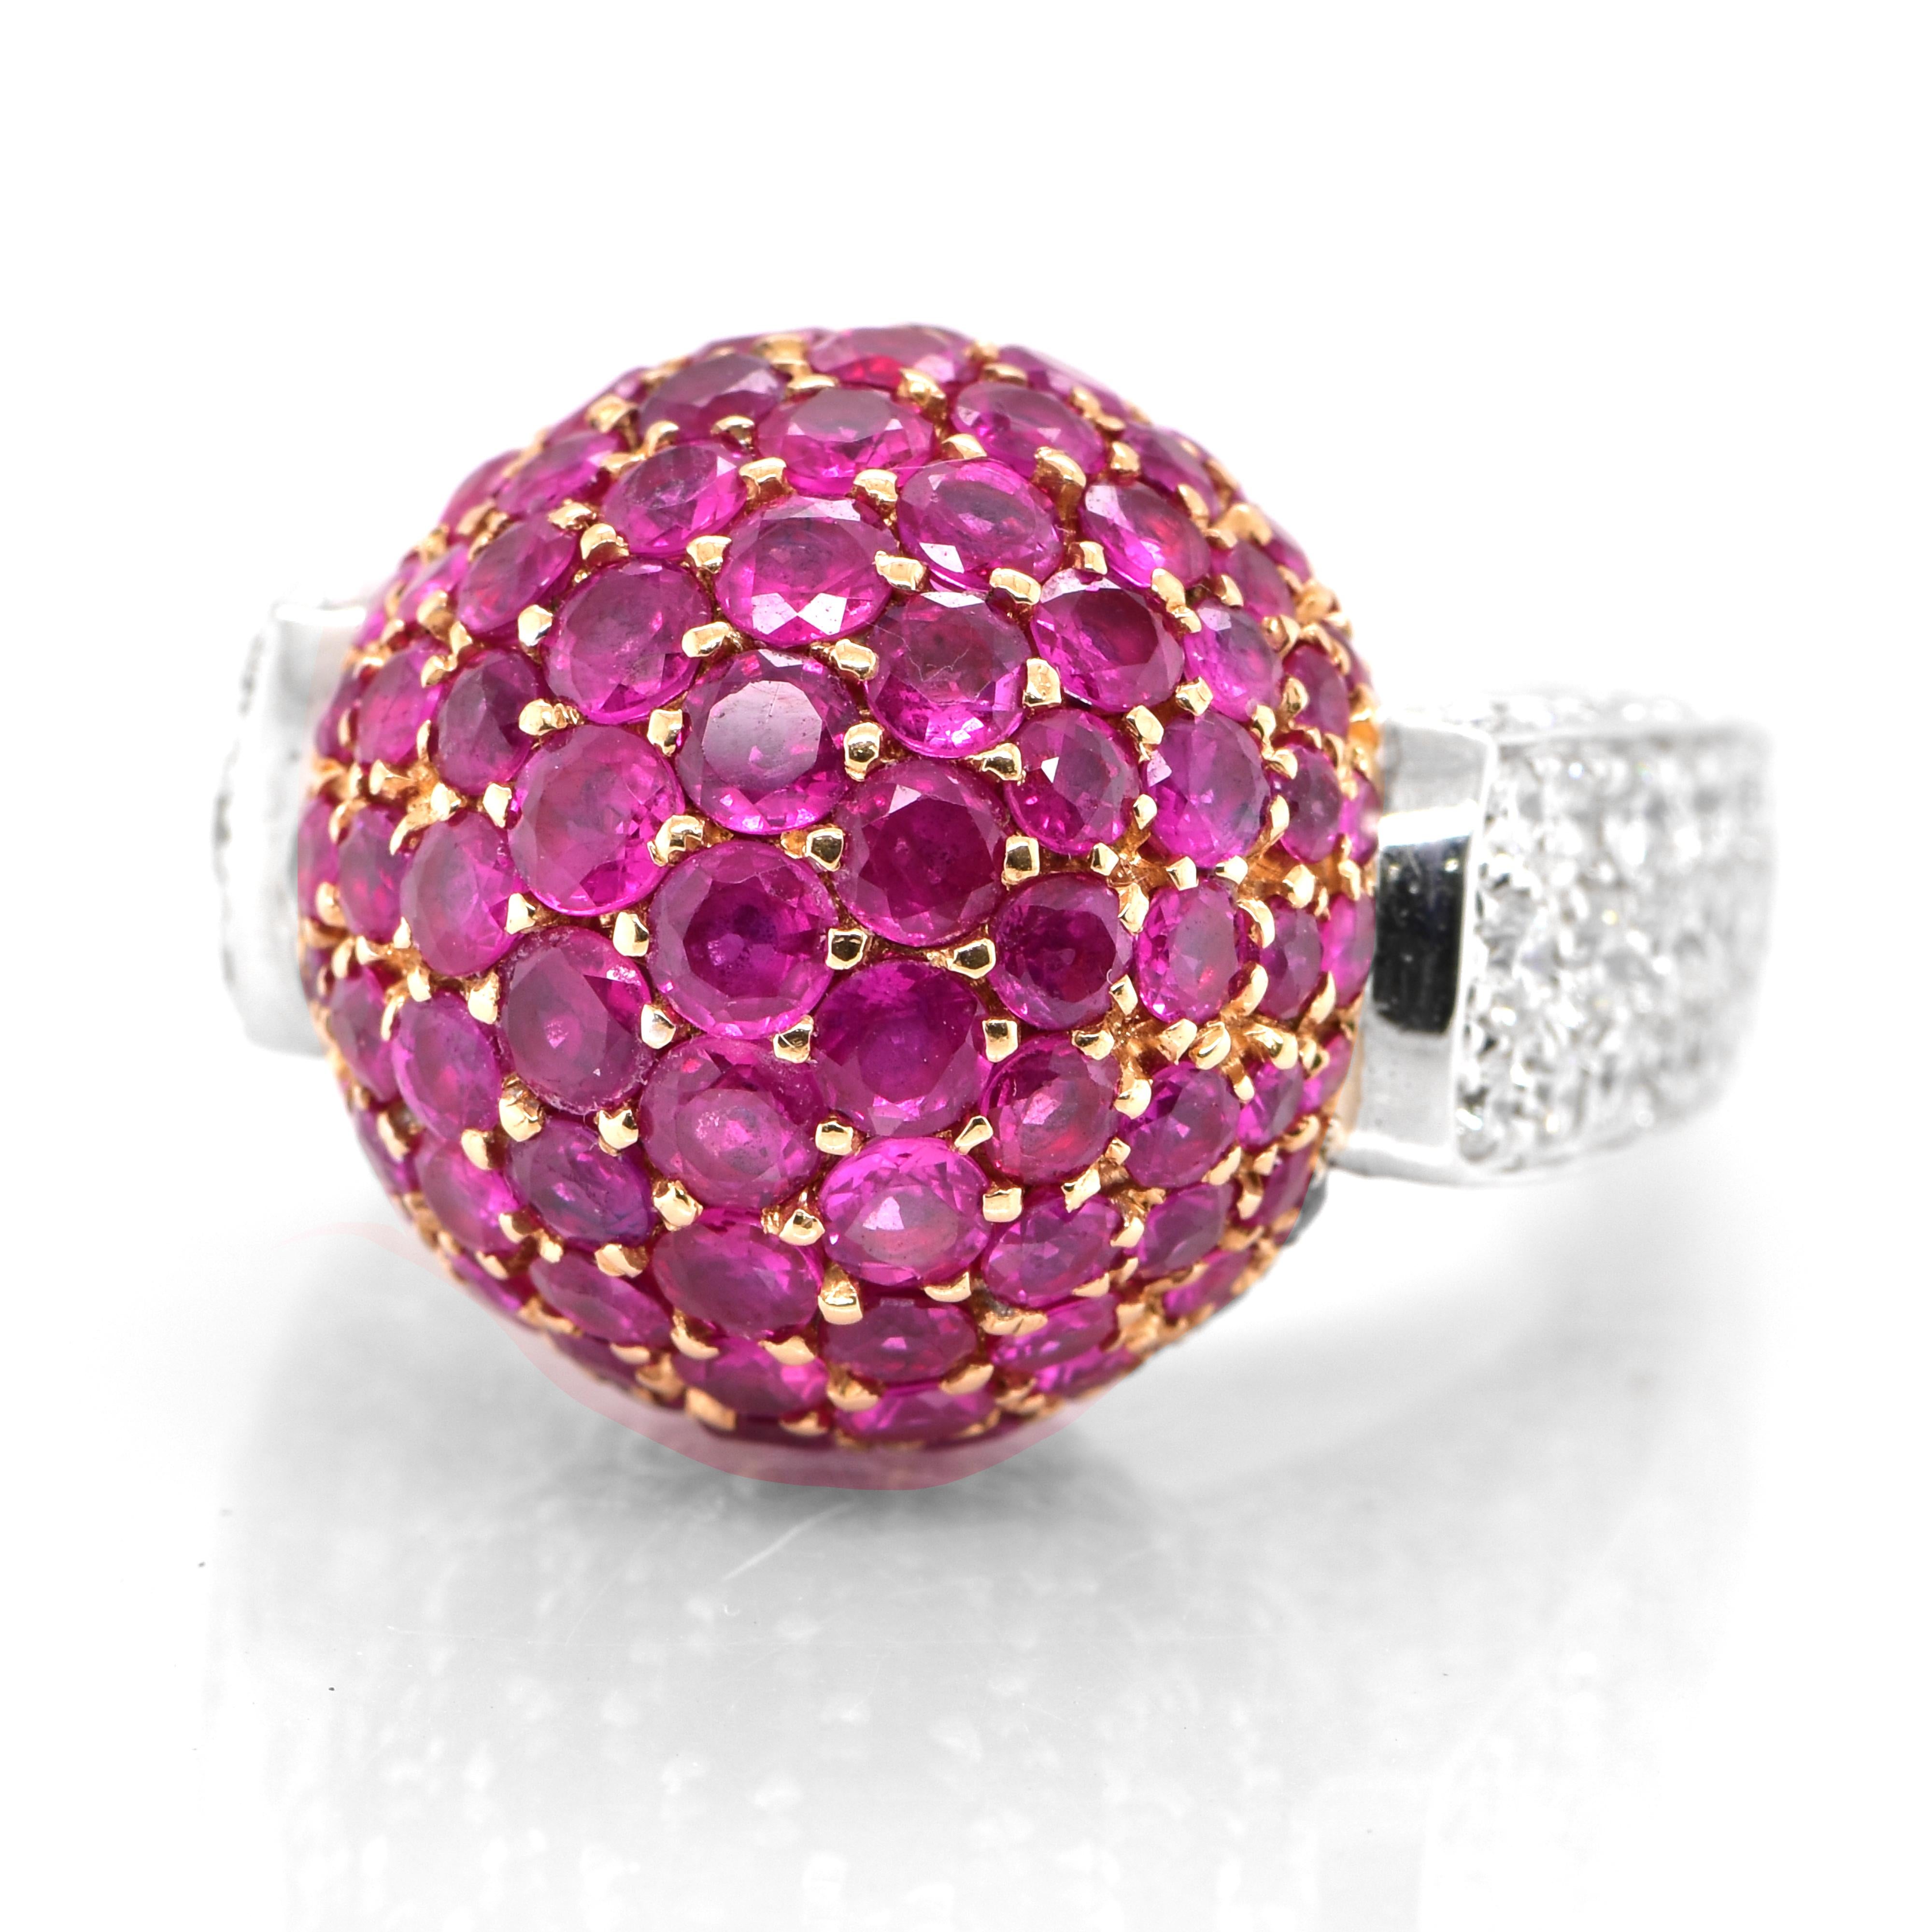 A beautiful Ring set in 18 Karat Gold featuring 5.86 Carat Natural Rubies and 3.32 Carat Diamonds. Rubies are referred to as 